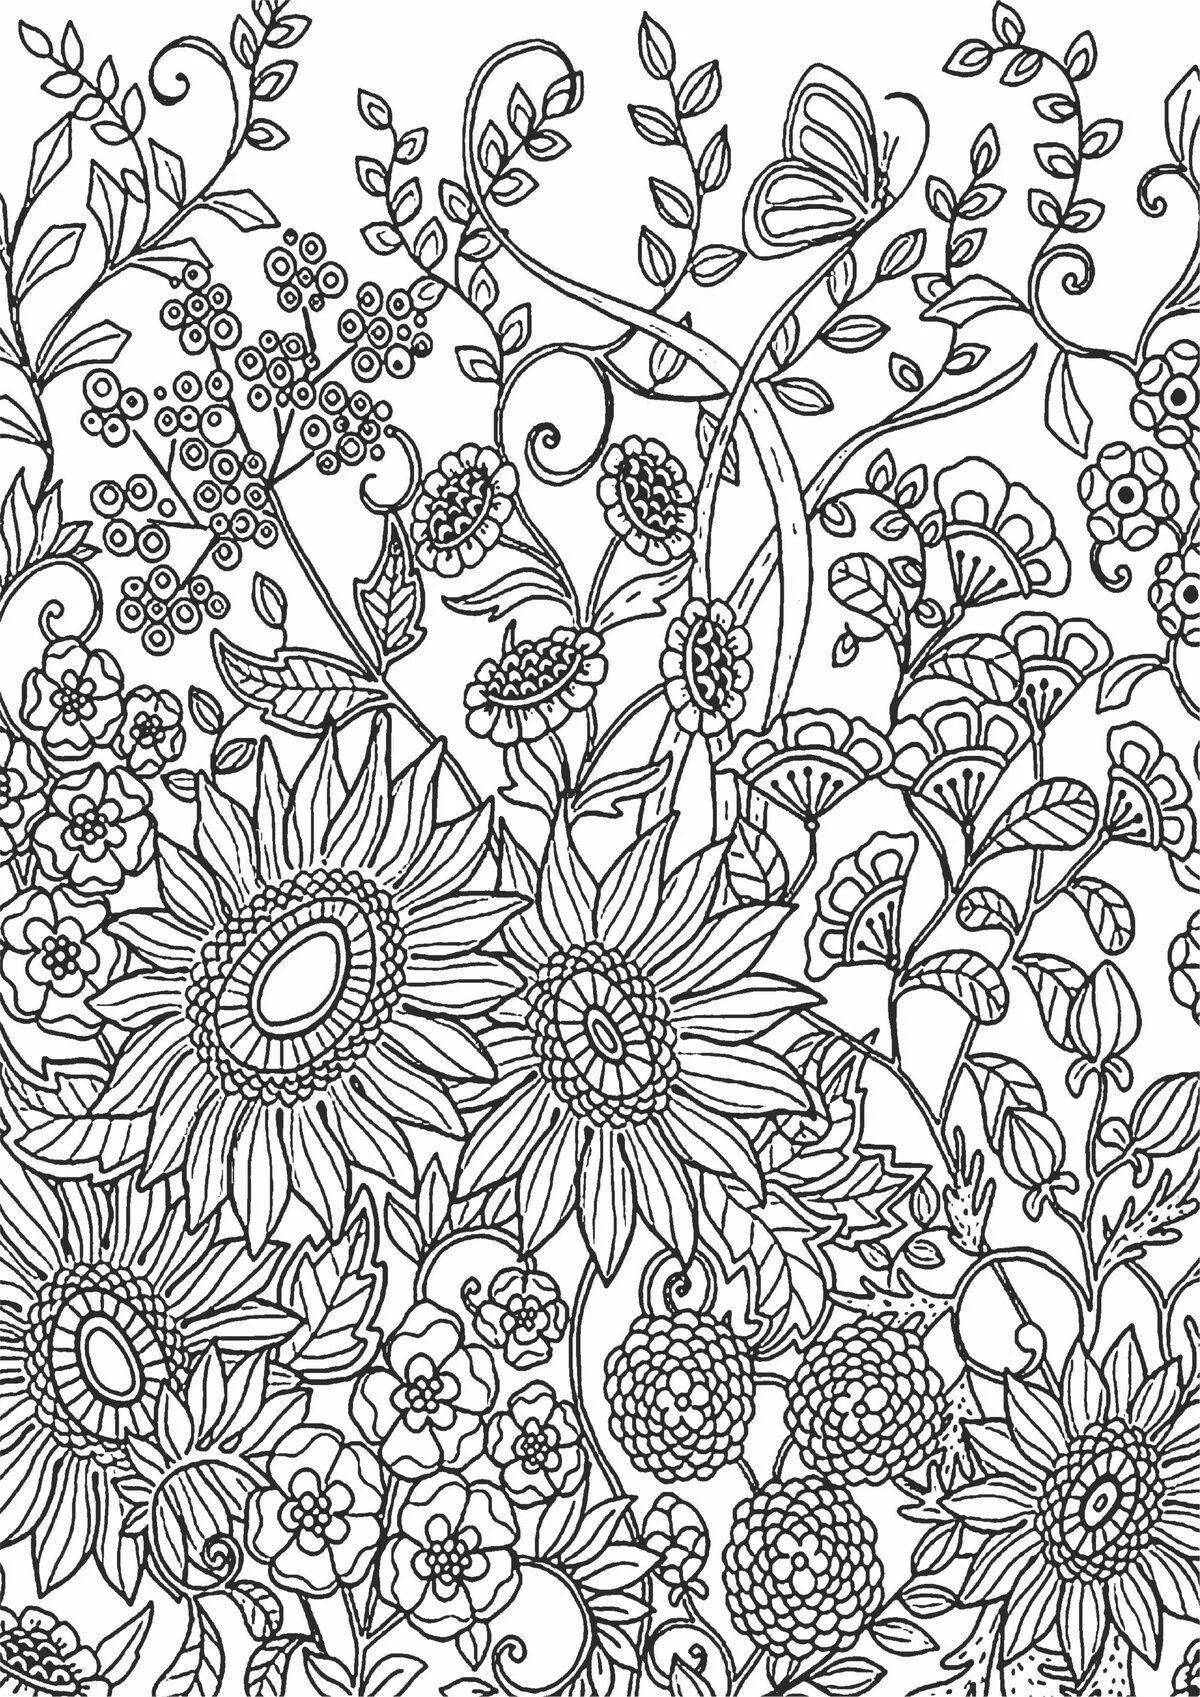 Art coloring for adults